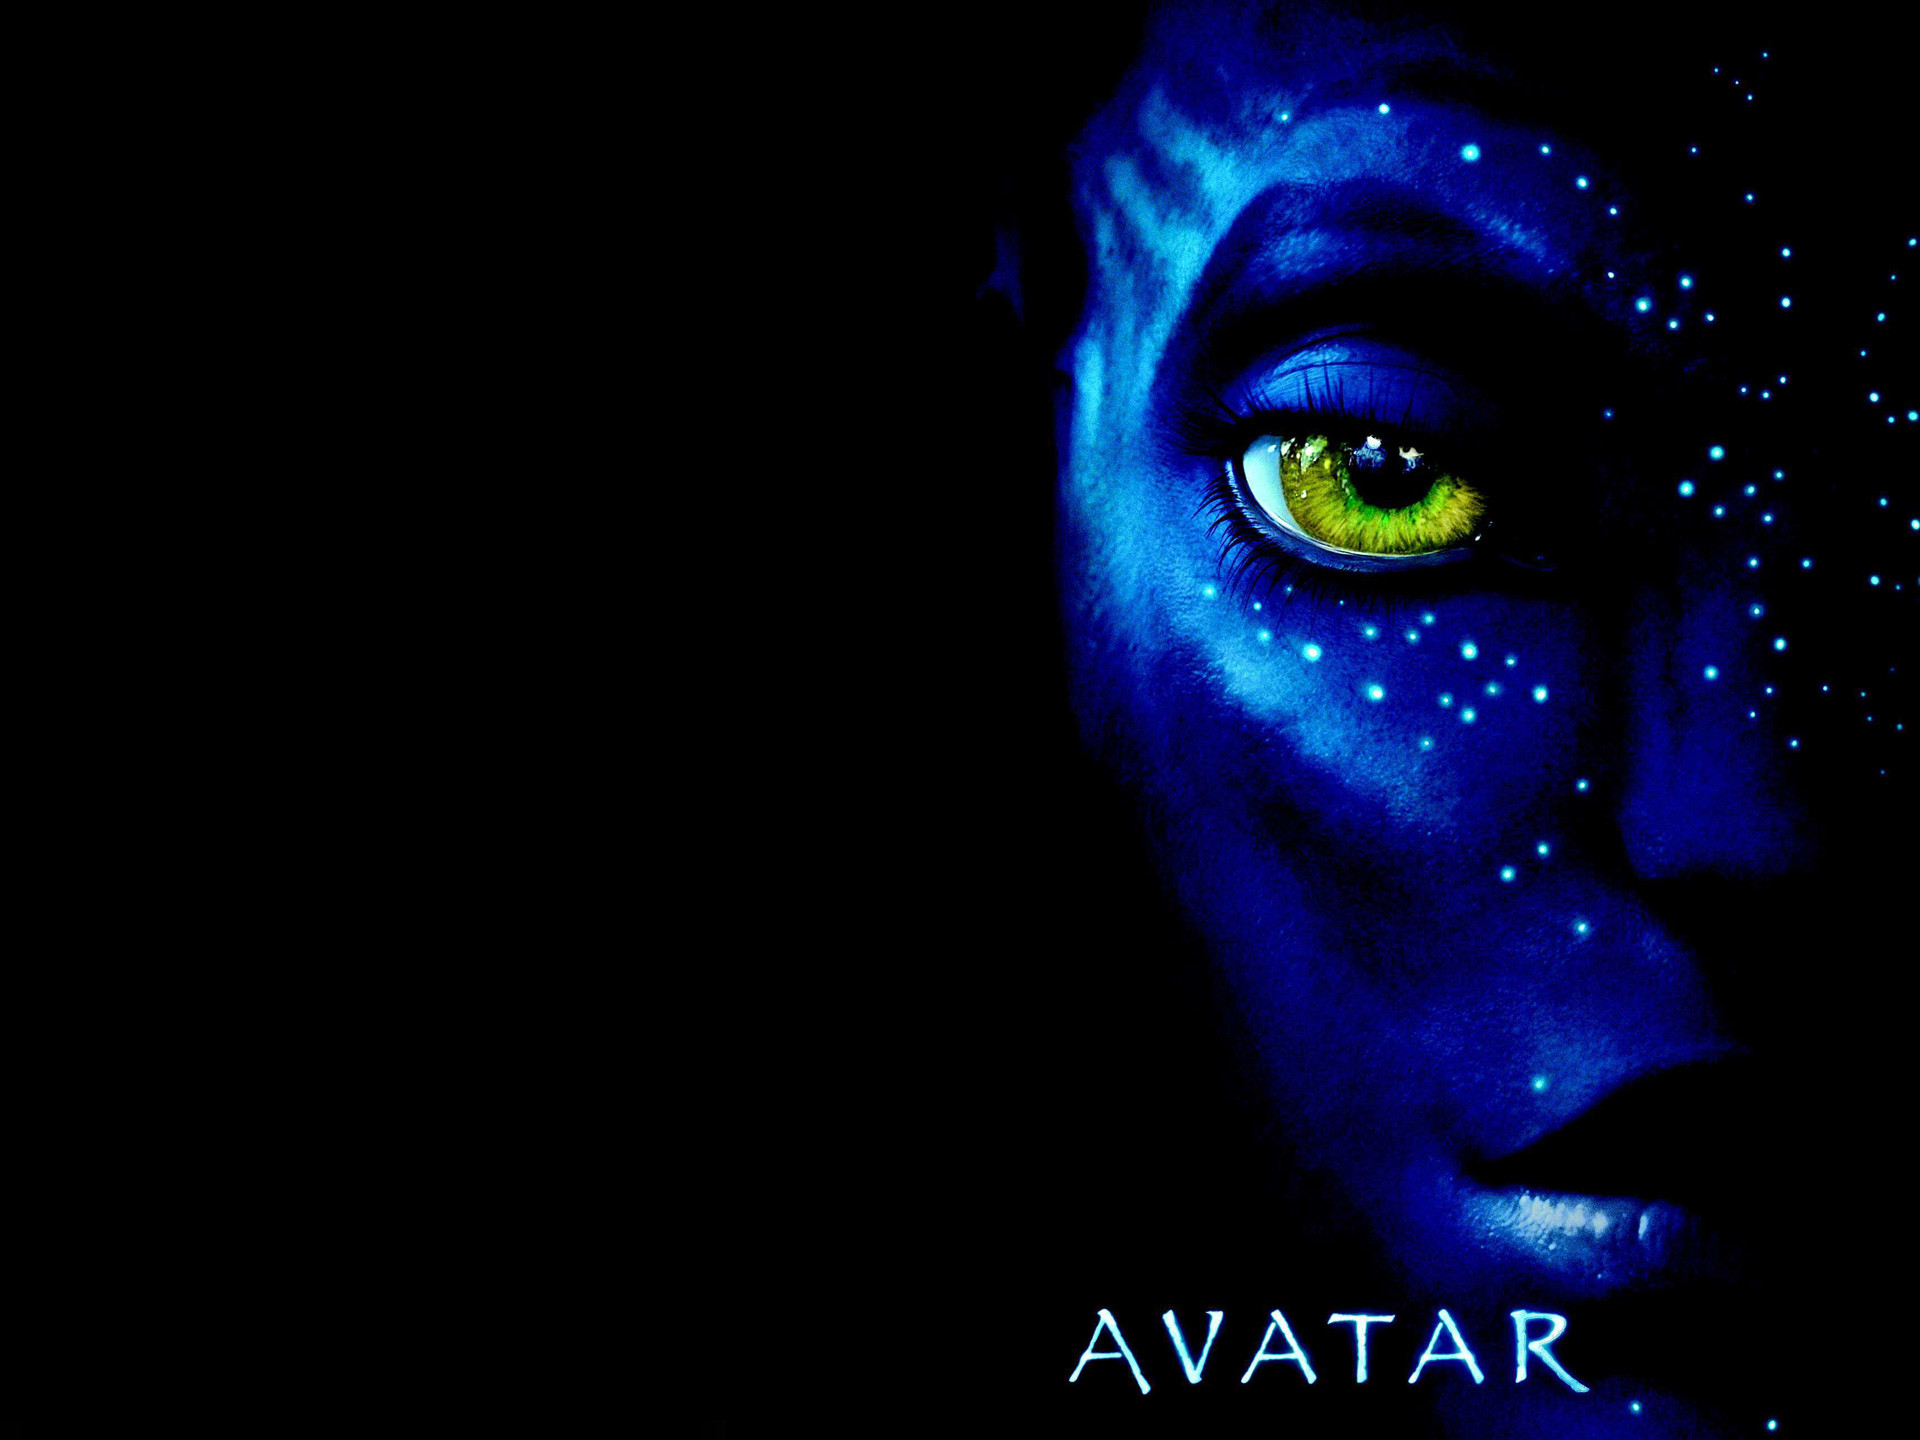 1920x1440 Avatar Movie Wallpapers Free Download Group (71+)